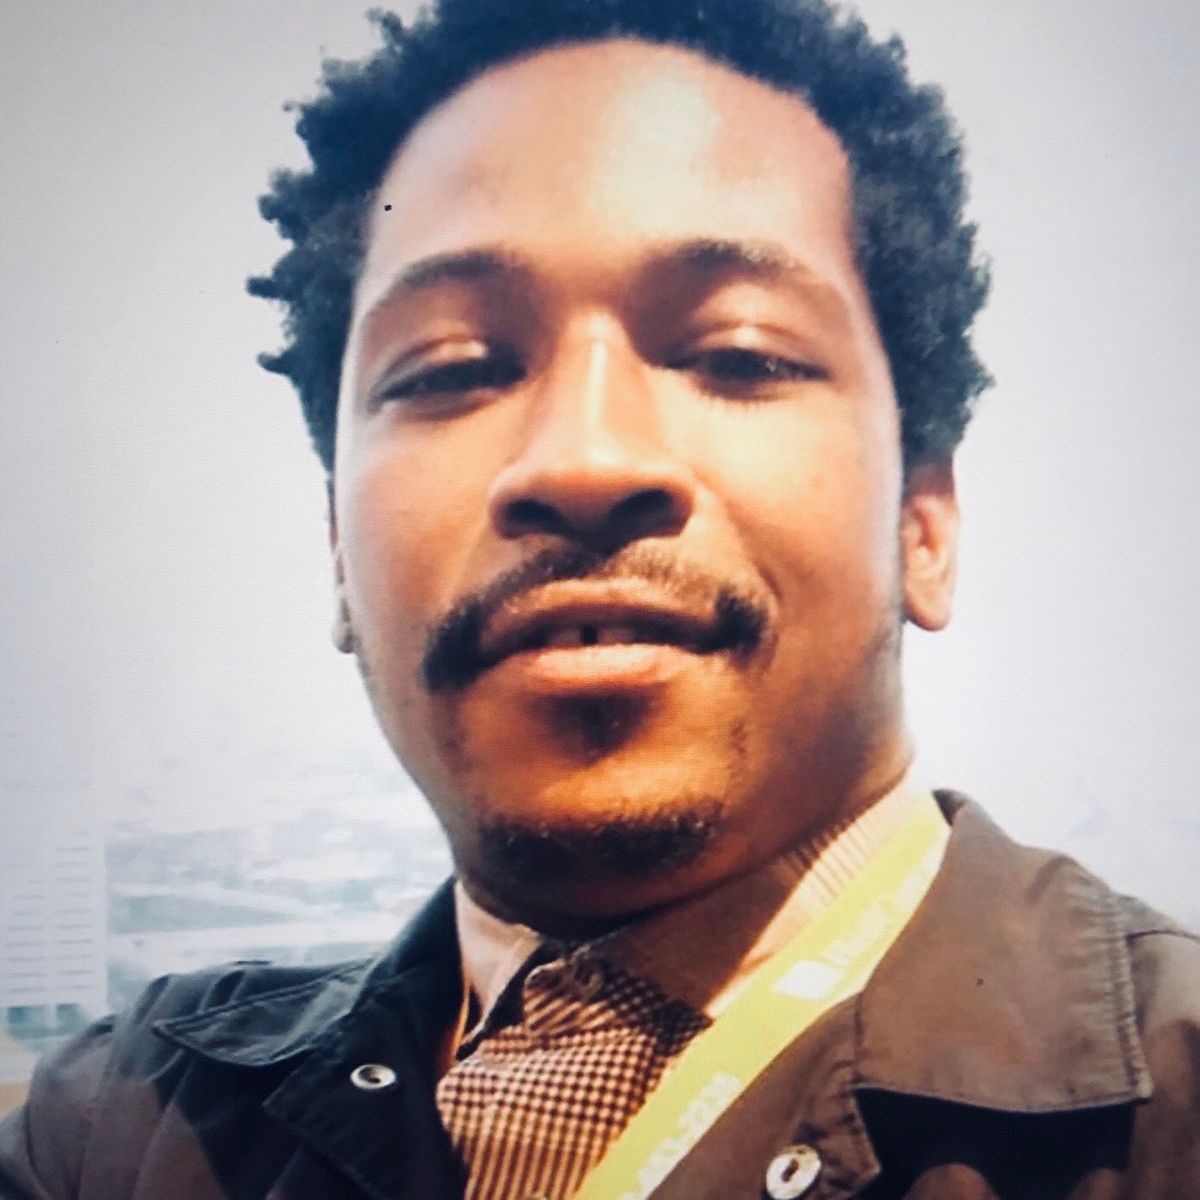 96. Rashard Brooks, age 27, died June 12, 2020After a complaint that someone was asleep in his car in a Wendy’s drive-thru parking lot. Cops arrived tried to arrest Rashard &he tried to flee. He was fatally shot.  #rashardbrooks  #justiceforrayshard  #sayhisname  #blacklivesmatter  